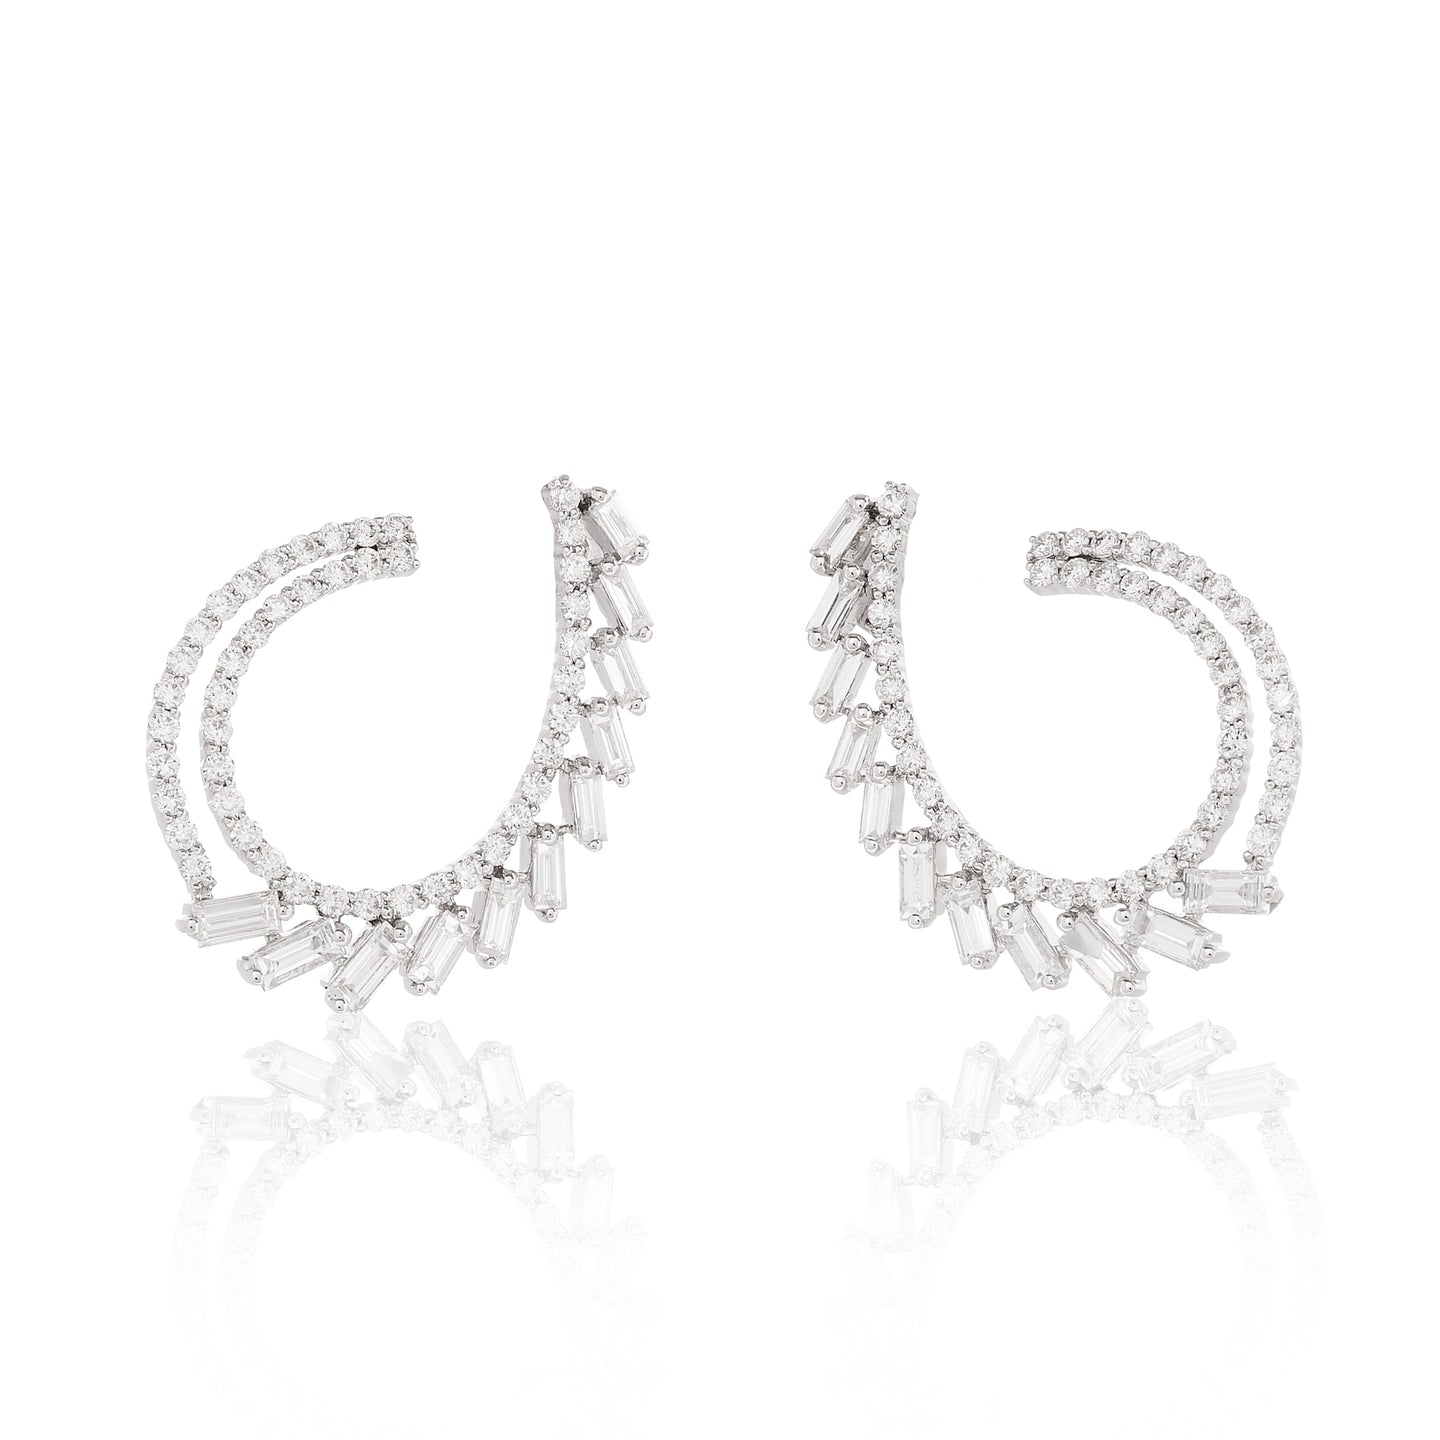 Curved Diamond Statement Earrings